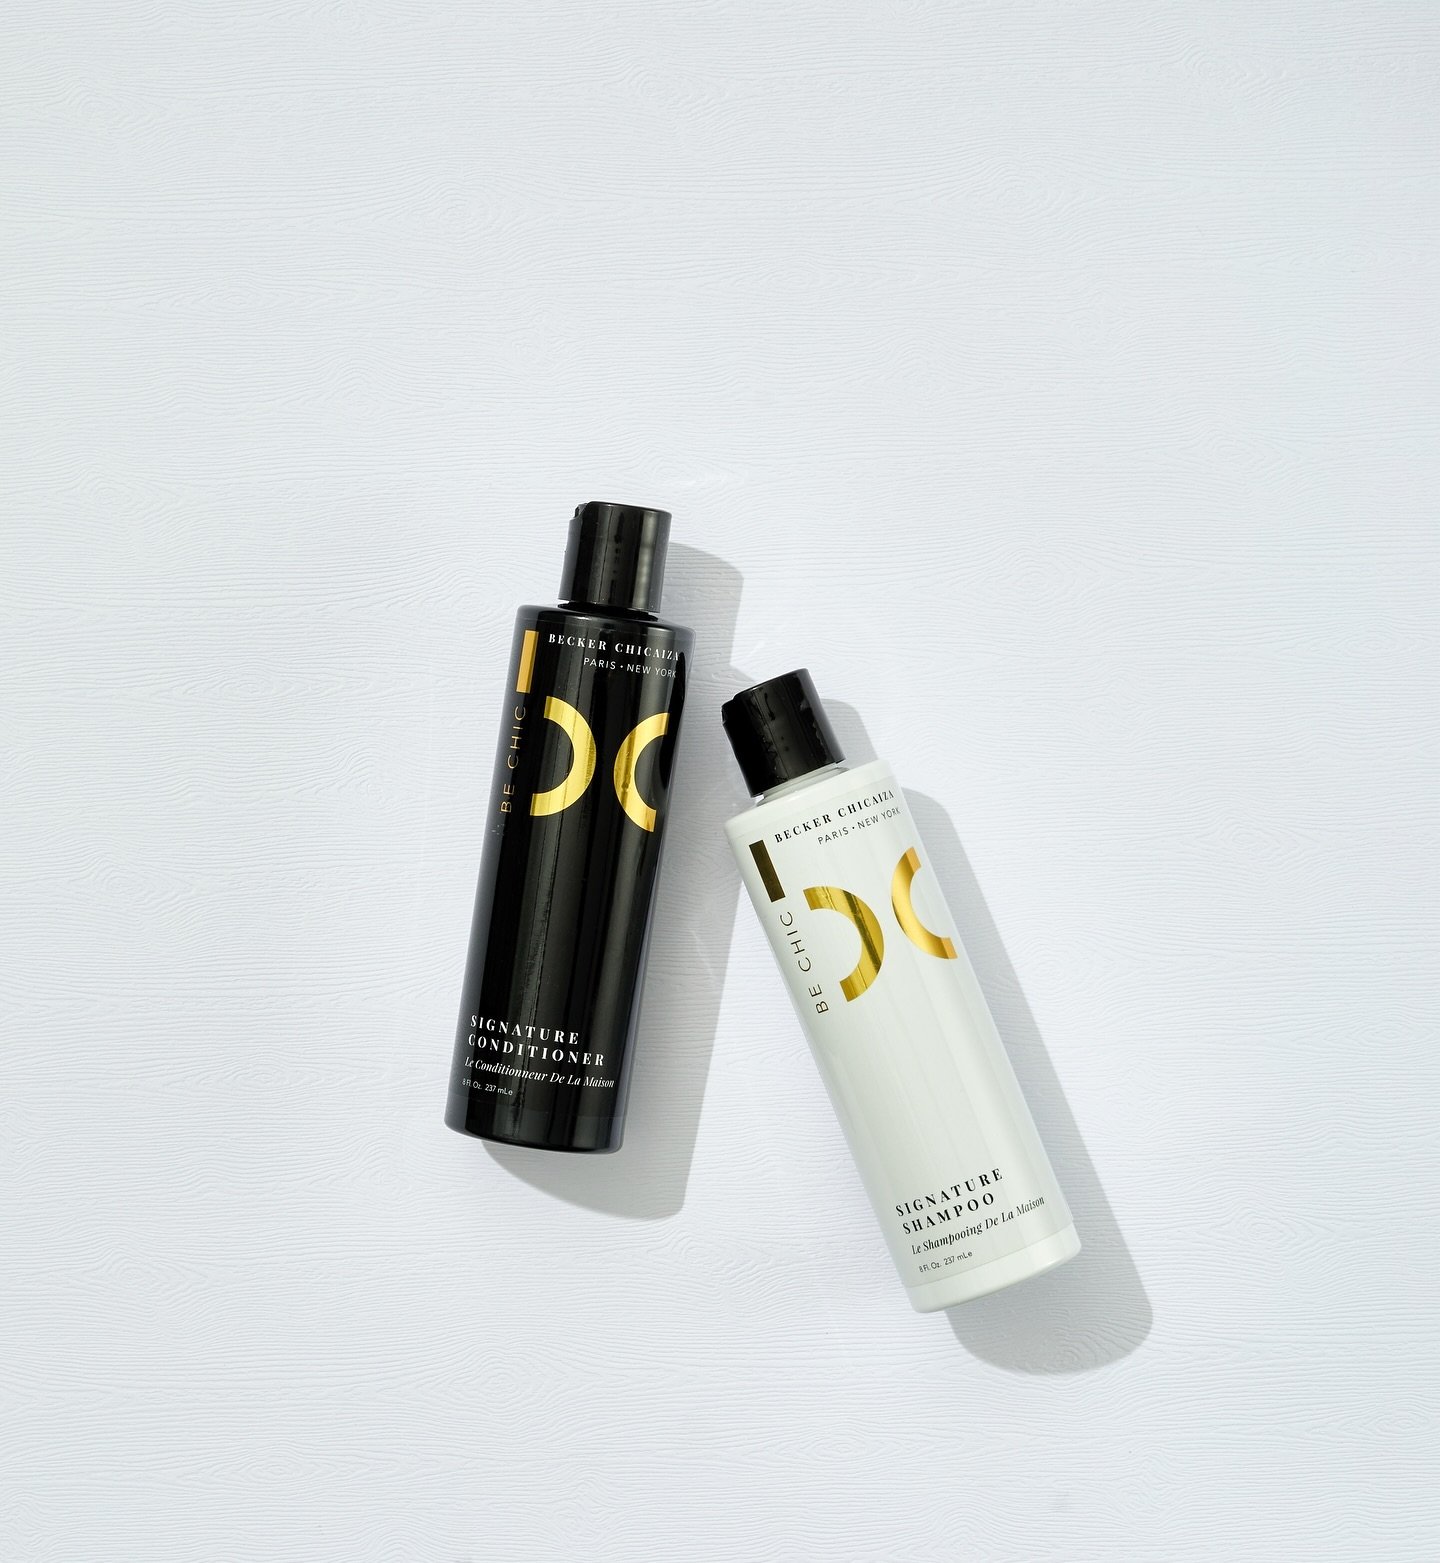 Sarah B. shares some real talk for our duo, BE CHIC Signature Shampoo and Conditioner: &ldquo;I first tried BE CHIC during a salon visit and immediately had to take some home with me. It&rsquo;s light, it&rsquo;s effective, it makes my hair soft and 